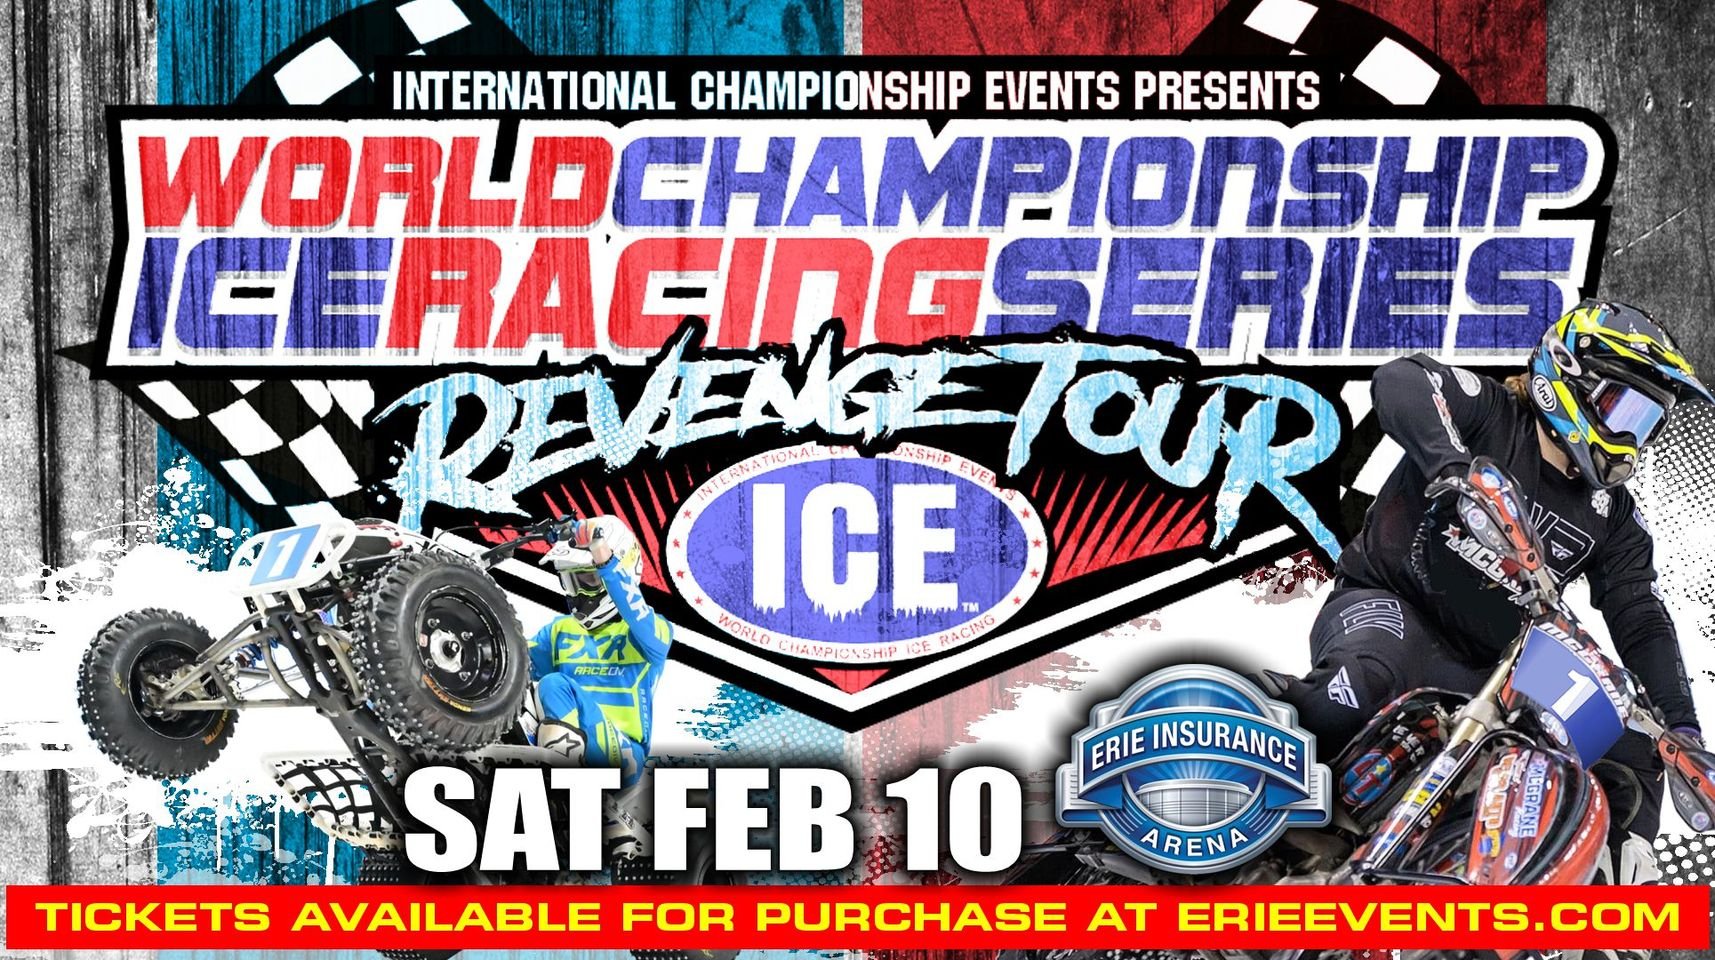 World Championship Motorcycle ICE Racing to Tear Up Track at Erie Insurance Arena